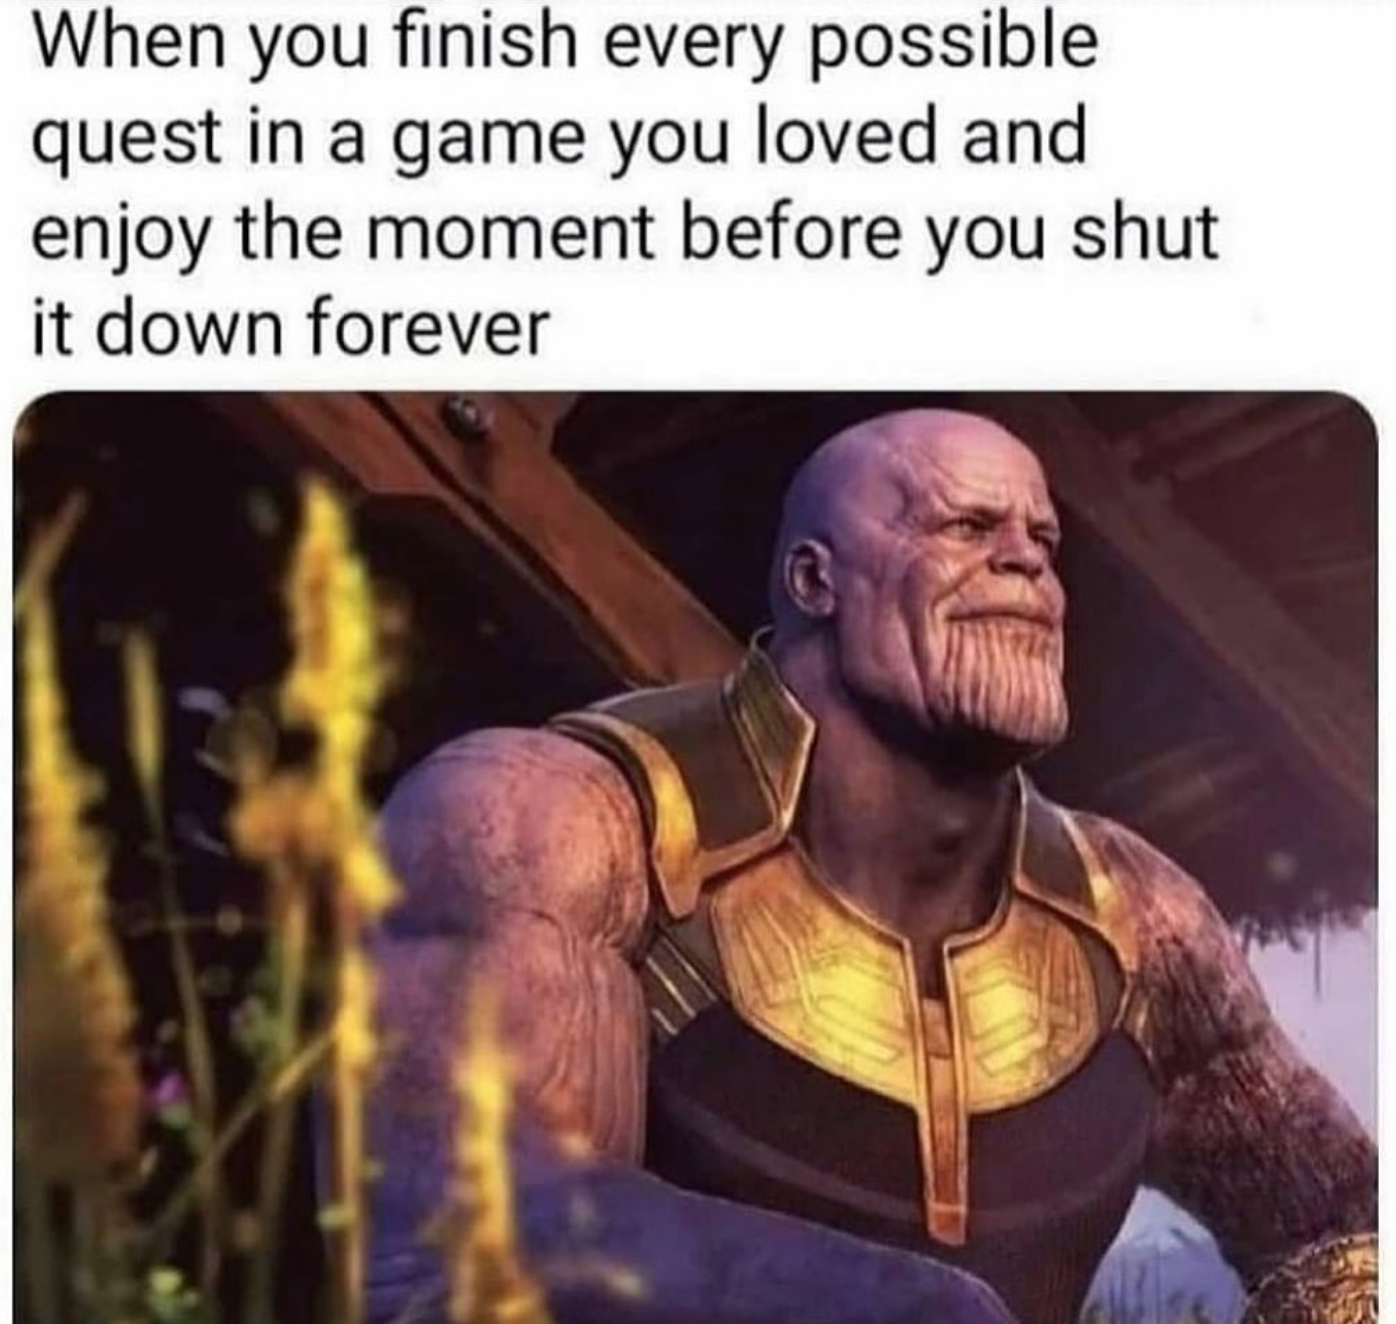 funny gaming memes - thanos wallpaper 4k - When you finish every possible quest in a game you loved and enjoy the moment before you shut it down forever